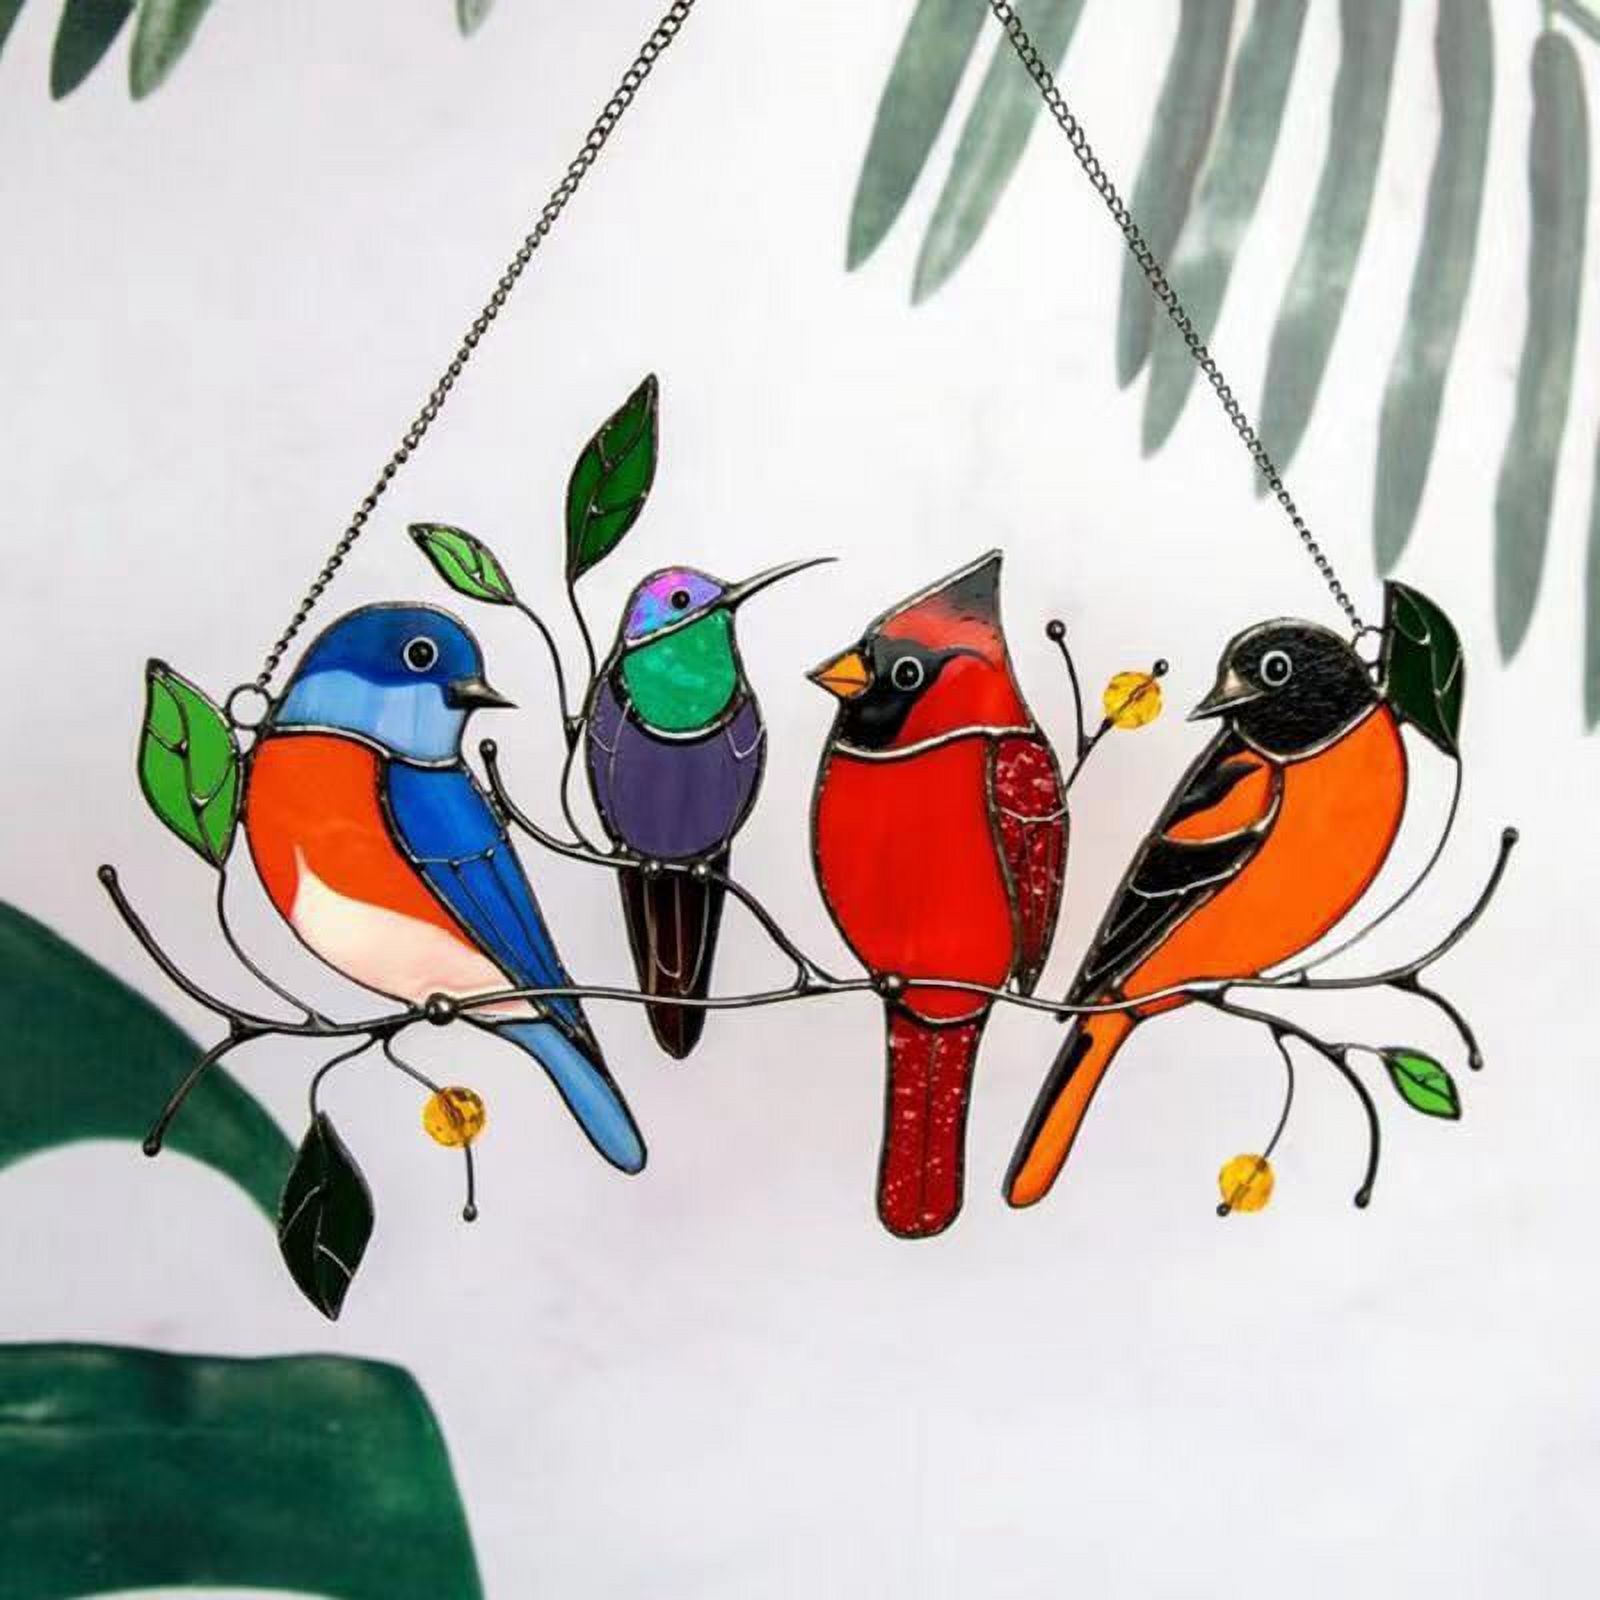 Multicolor Birds On A Wire High Stained Ornament Glass Suncatcher Window Panel,Bird Series Hanging Ornaments Pendant Home Decoration,Home Decor Gifts For Bird 1PC - image 3 of 10